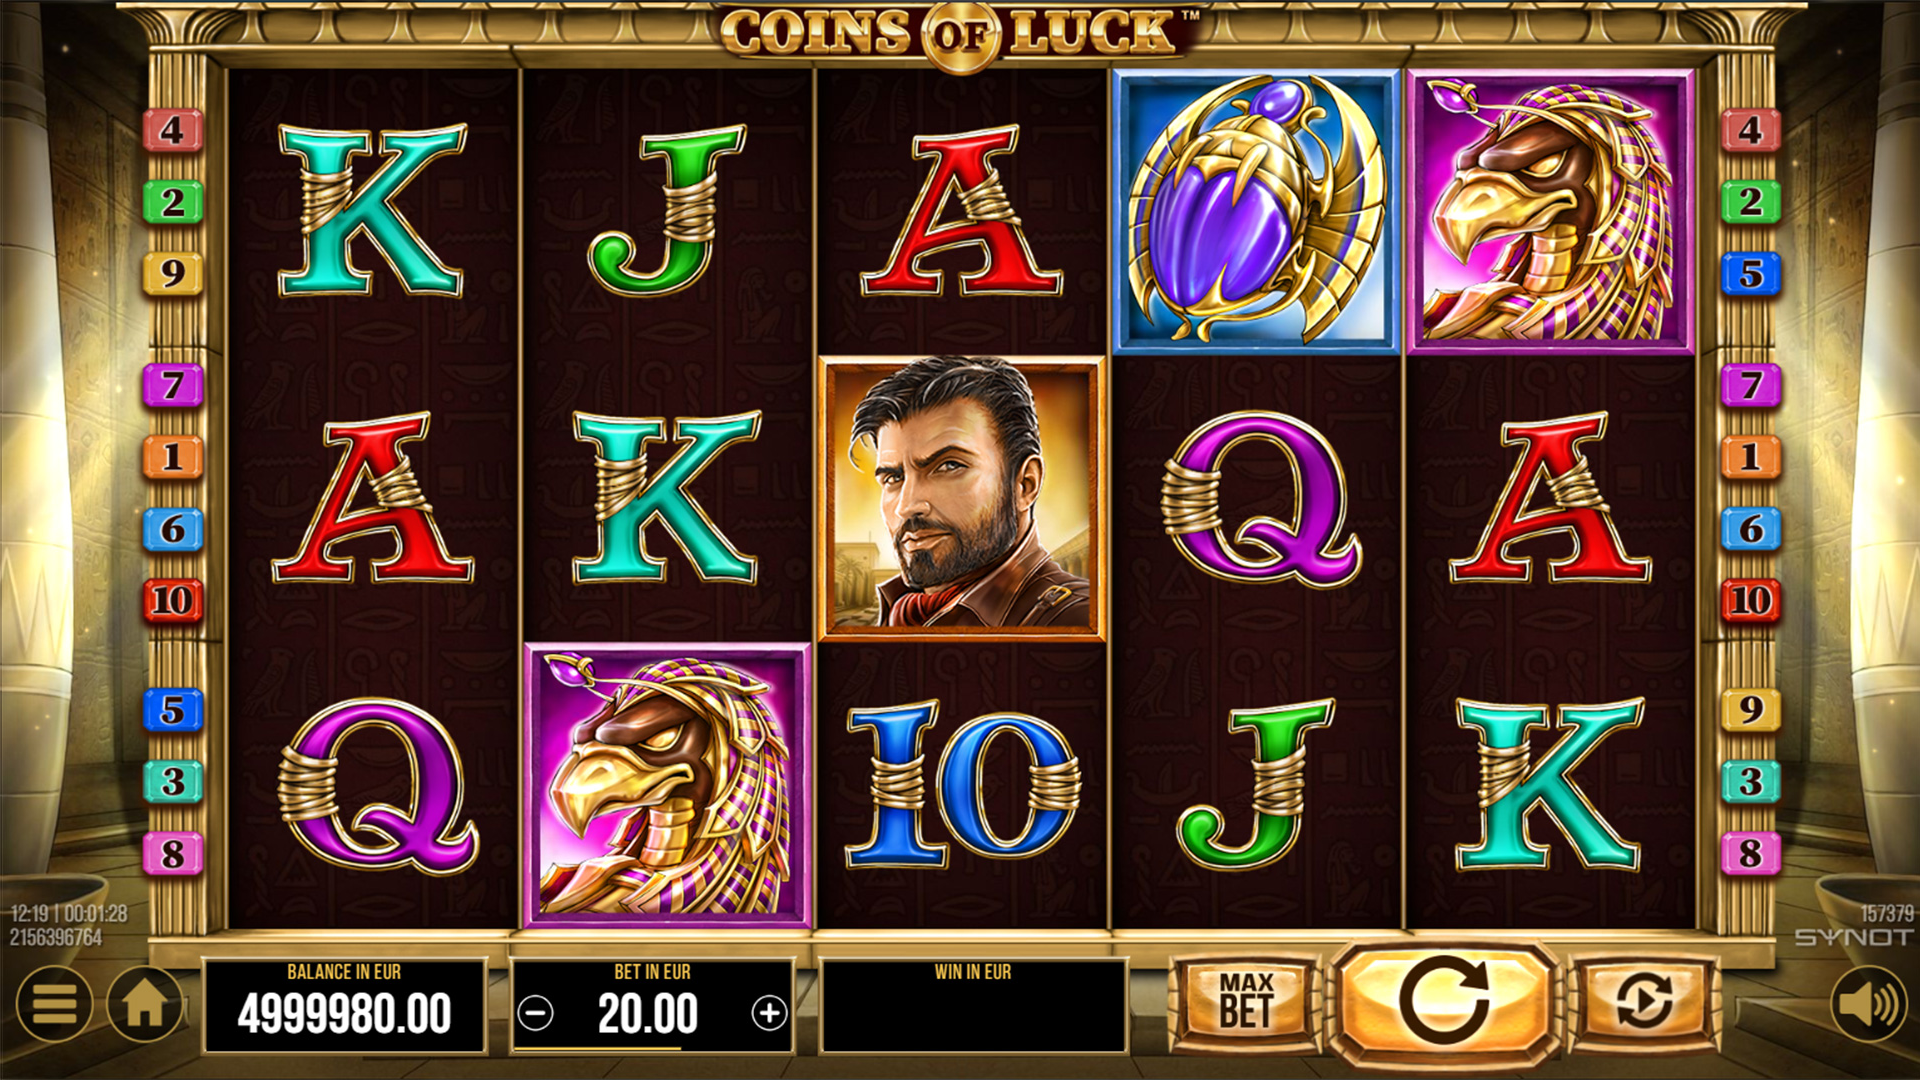 Coins of Luck Slot Theme